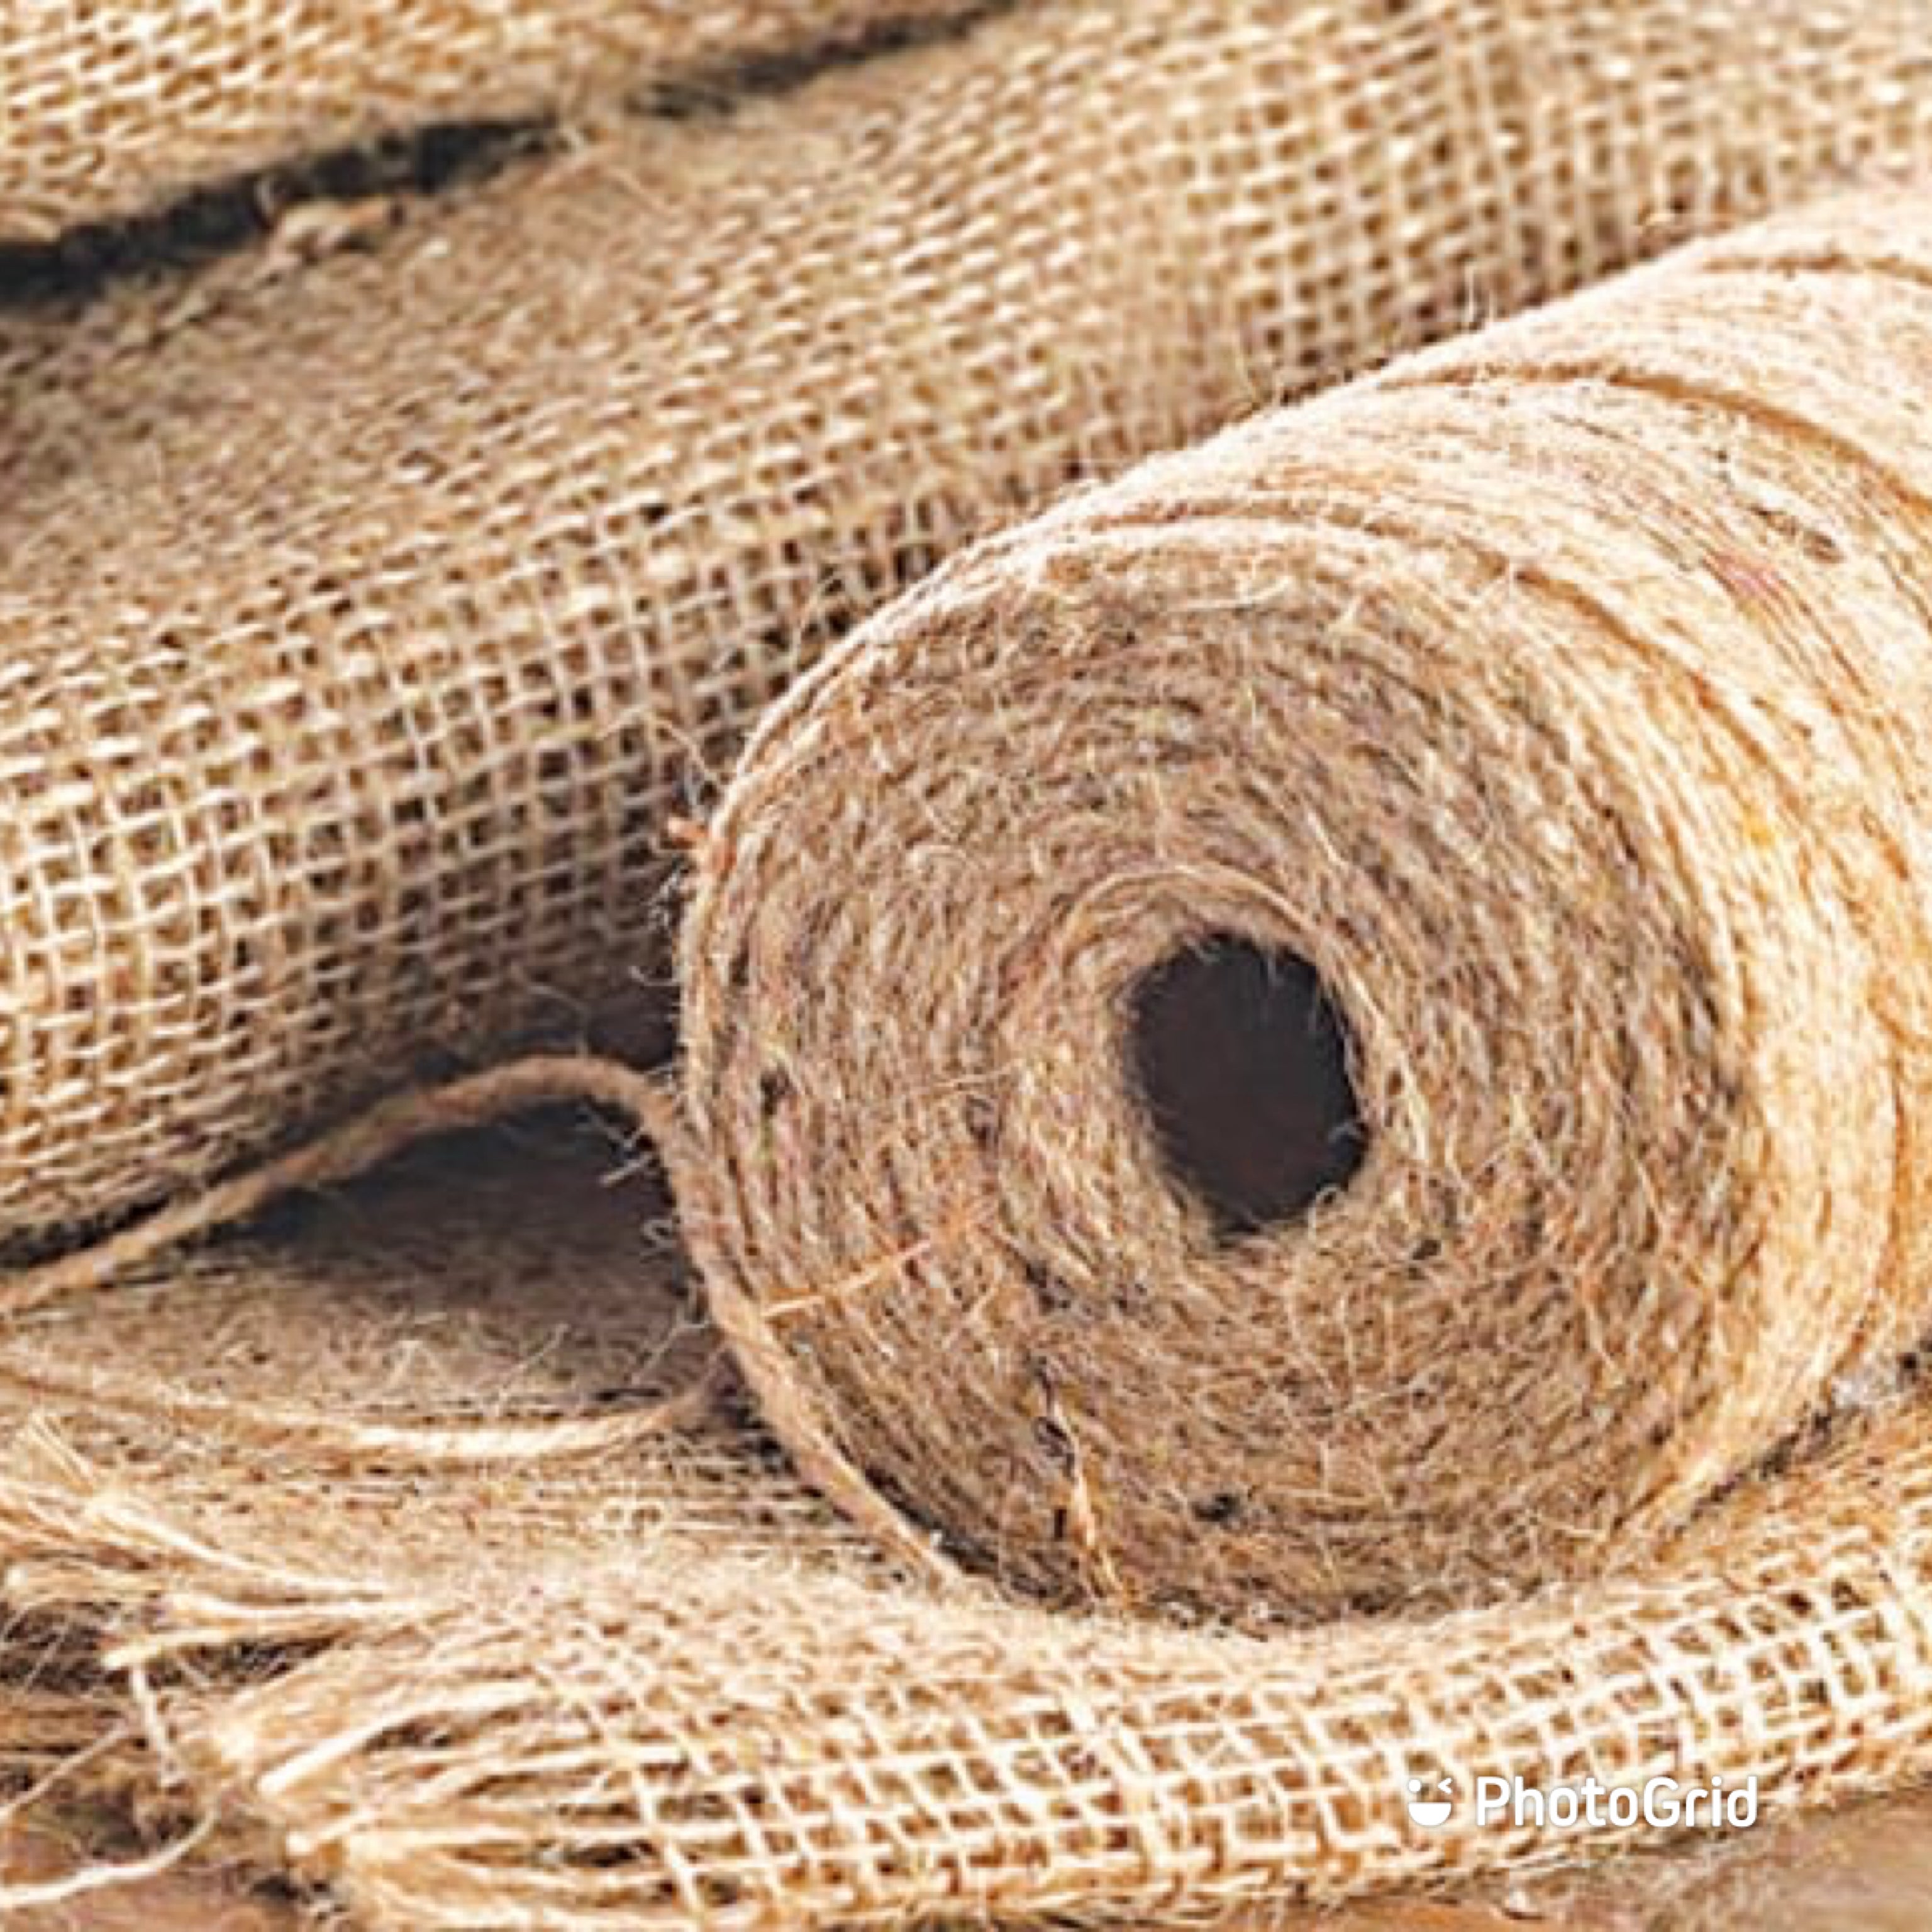 Jute - Why Is It A Sustainable Fibre?